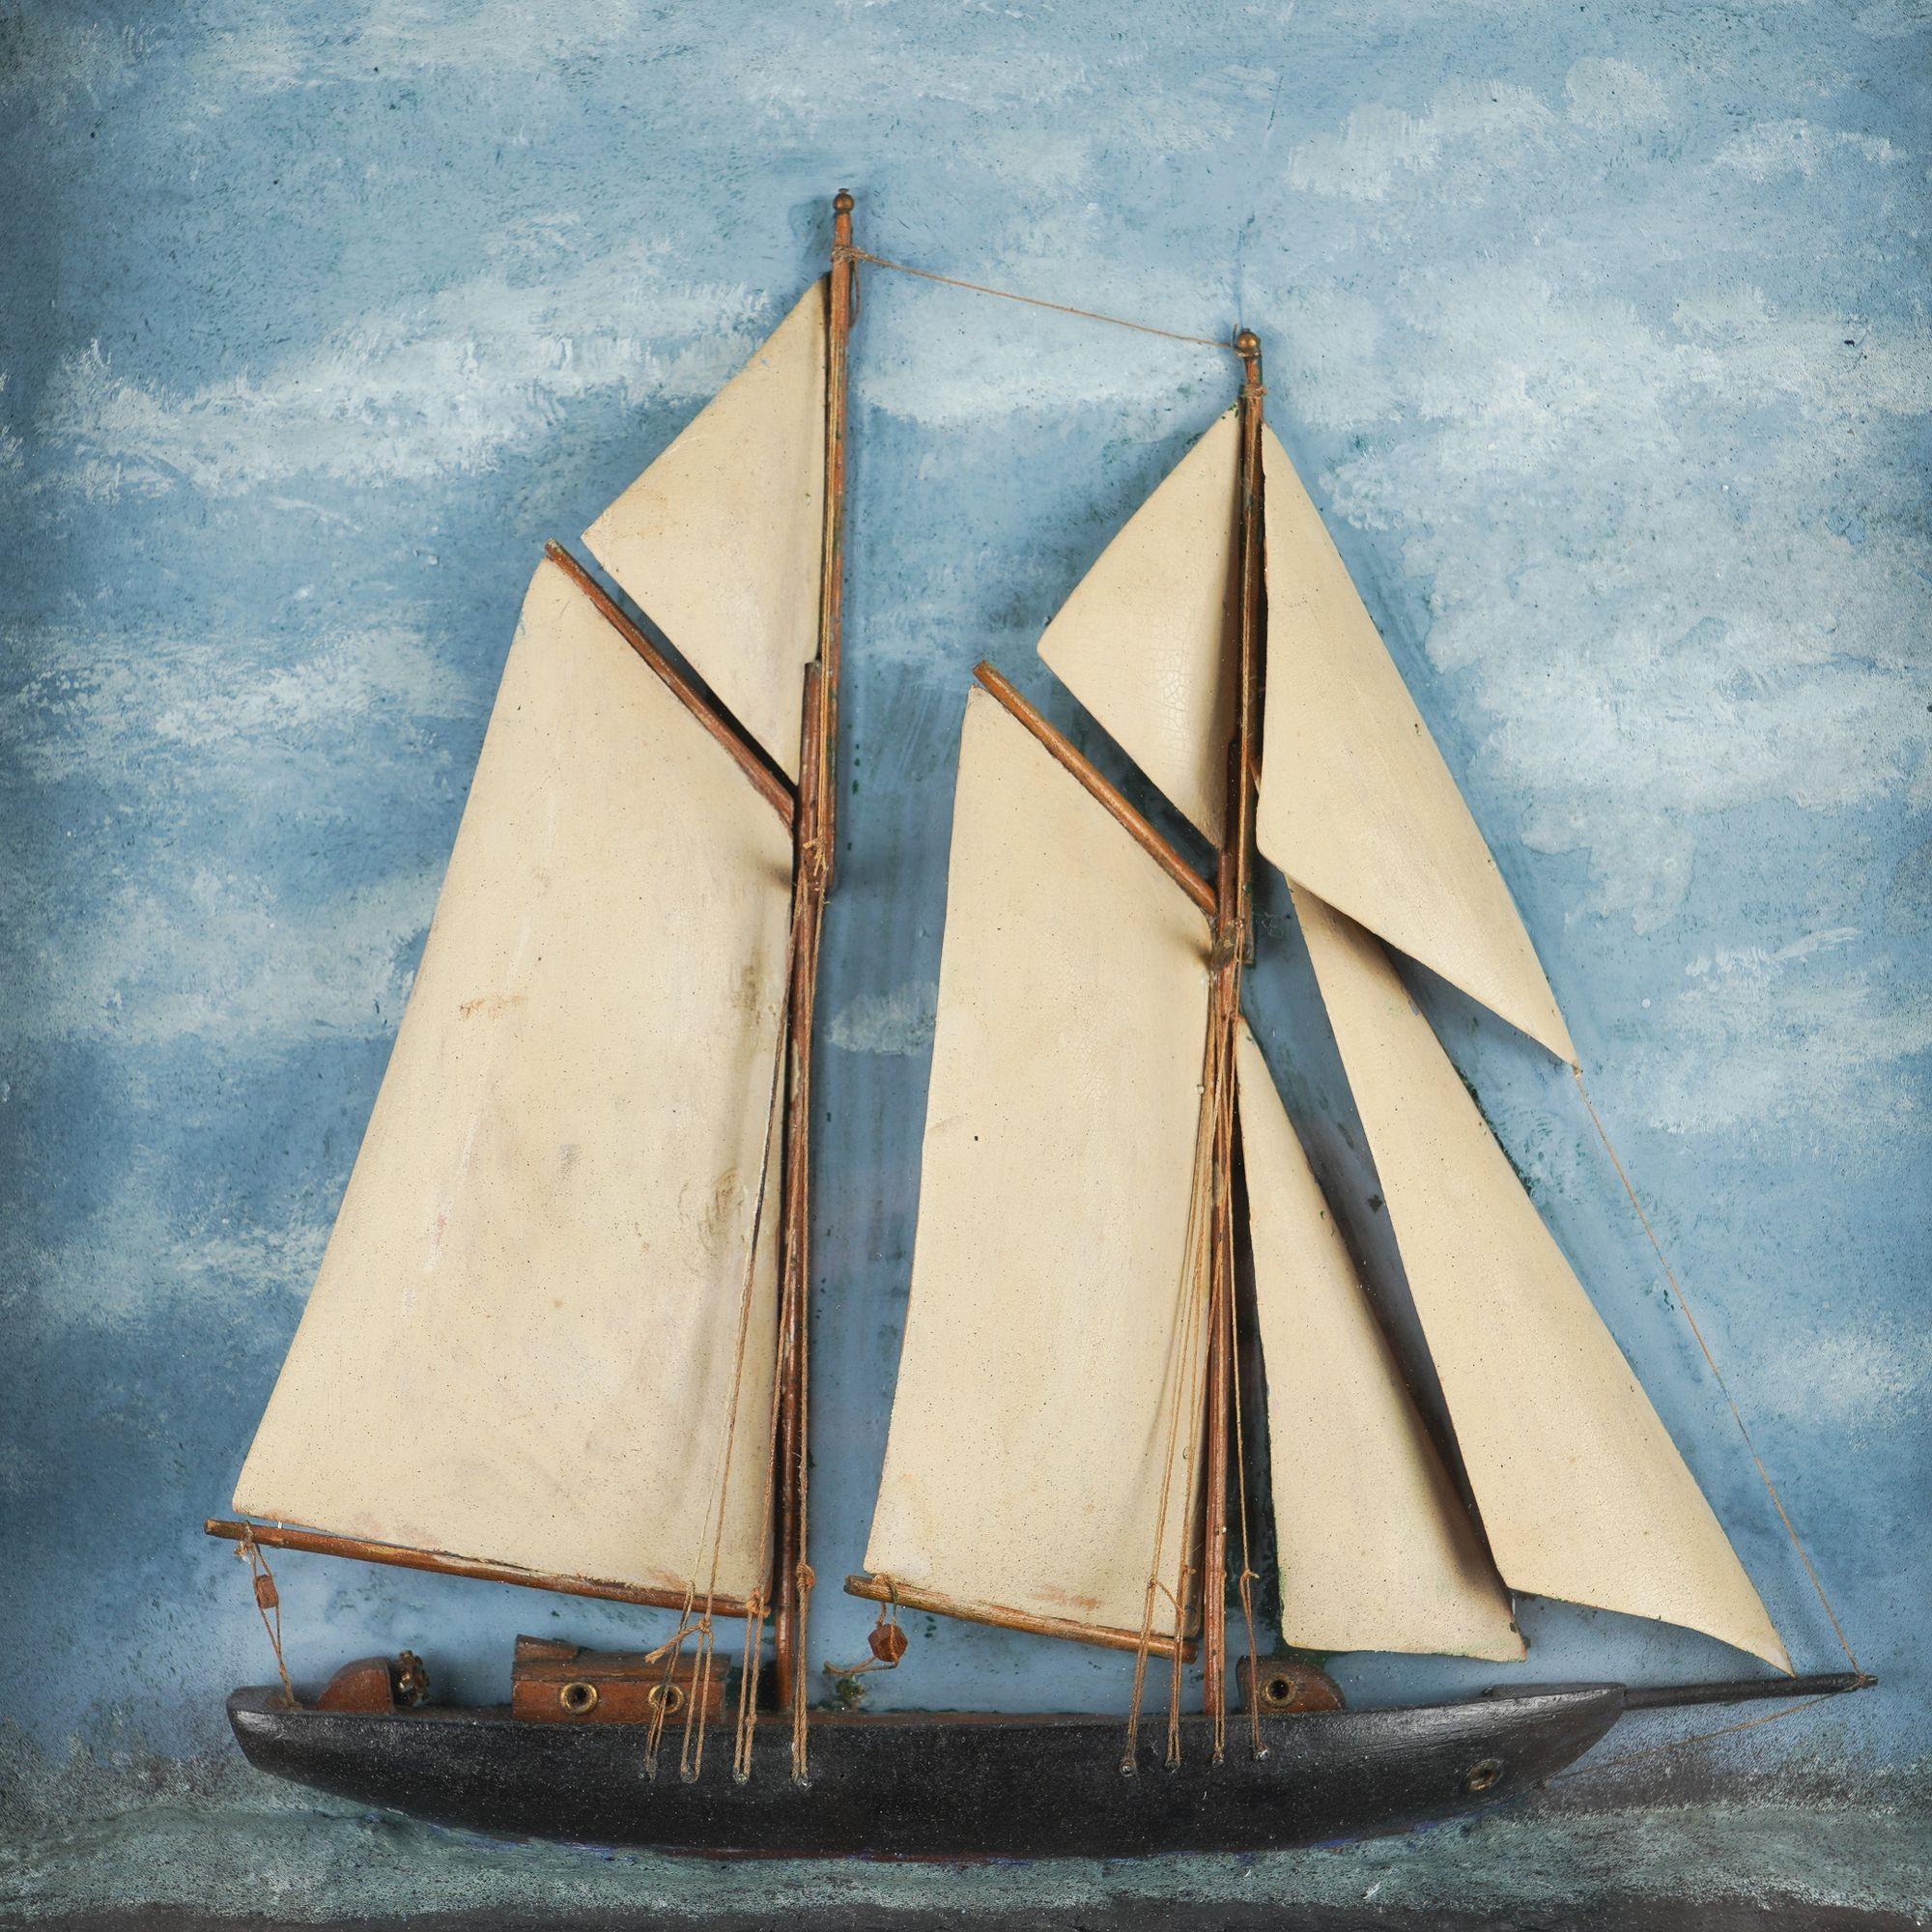 Half ship diorama of a two masted sailboat on a painted plaster sea, which is set against a sky of painted clouds. The work is mounted in a painted wood shadow box and fitted with period glass. The shadow box frame has a slight irregularity to the